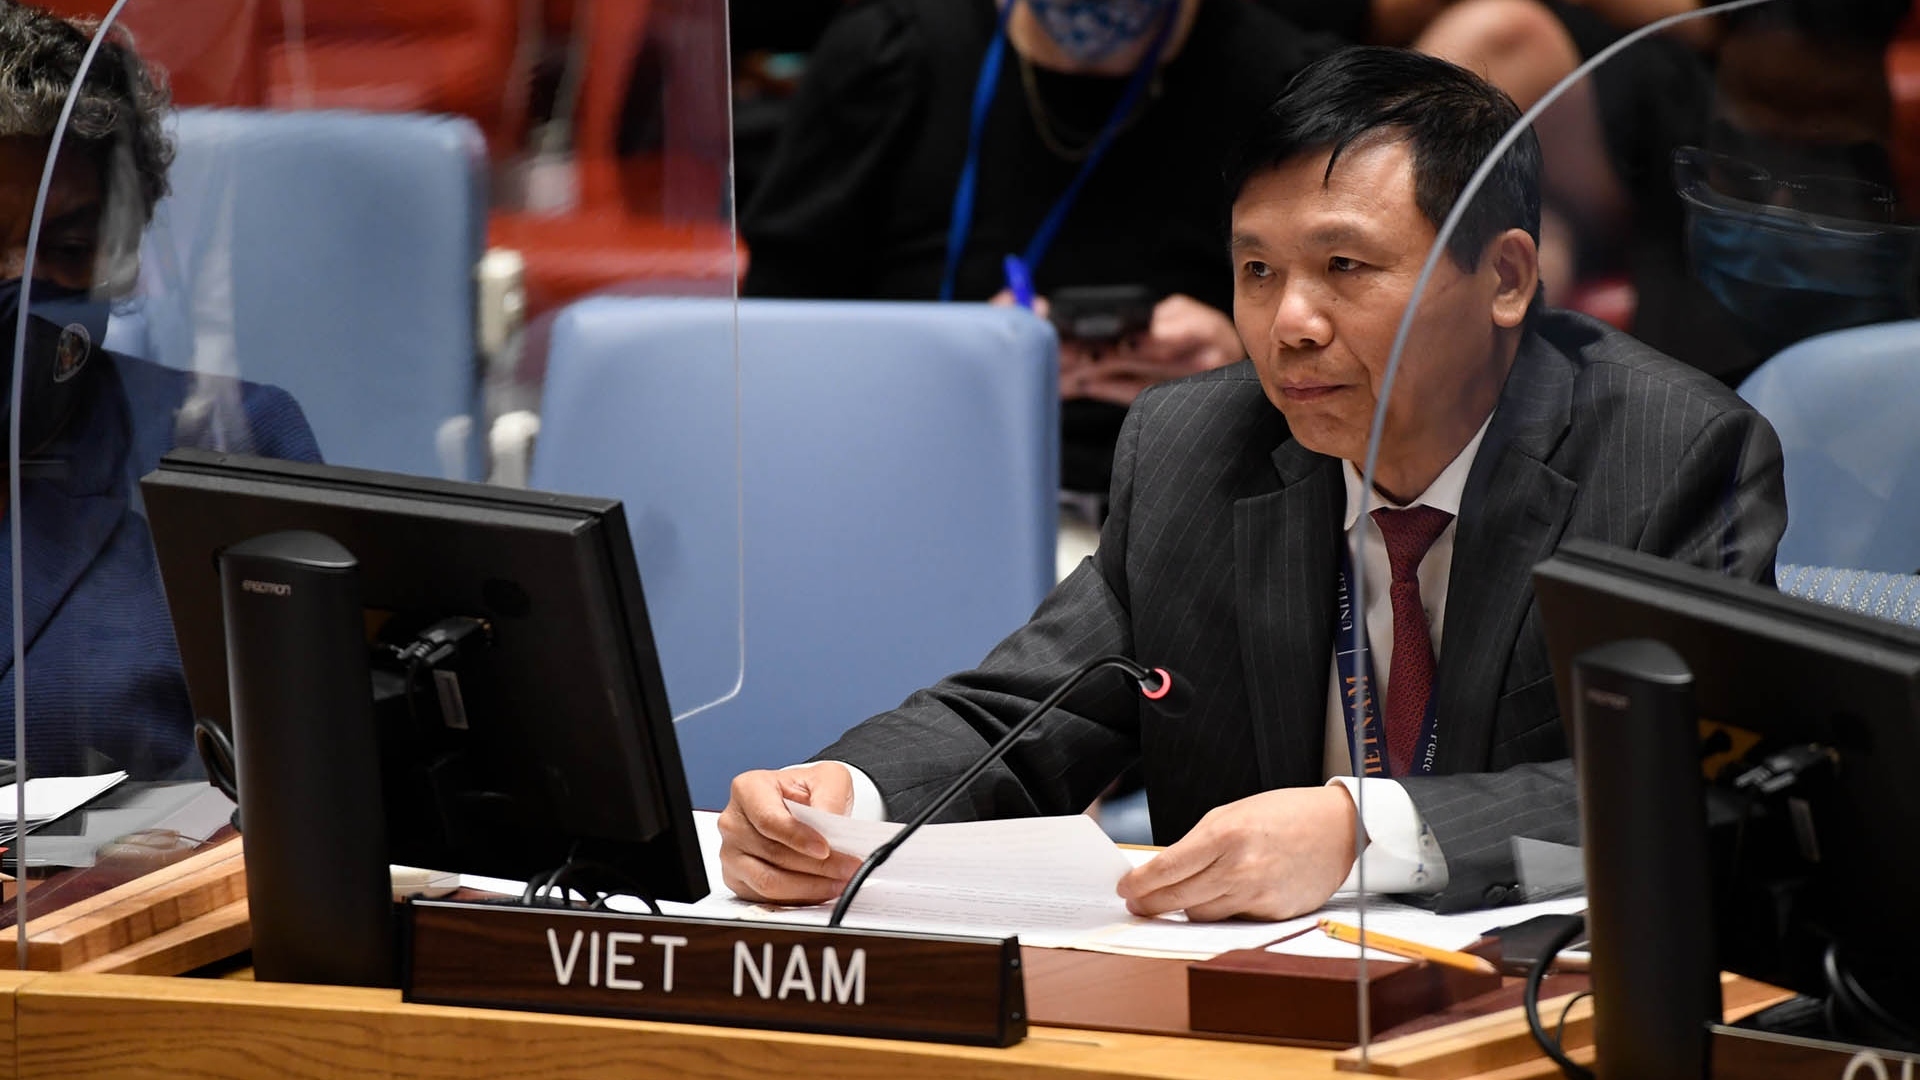 Viet Nam calls for ensuring security of elections in Iraq: Ambassador Dang Dinh Quy